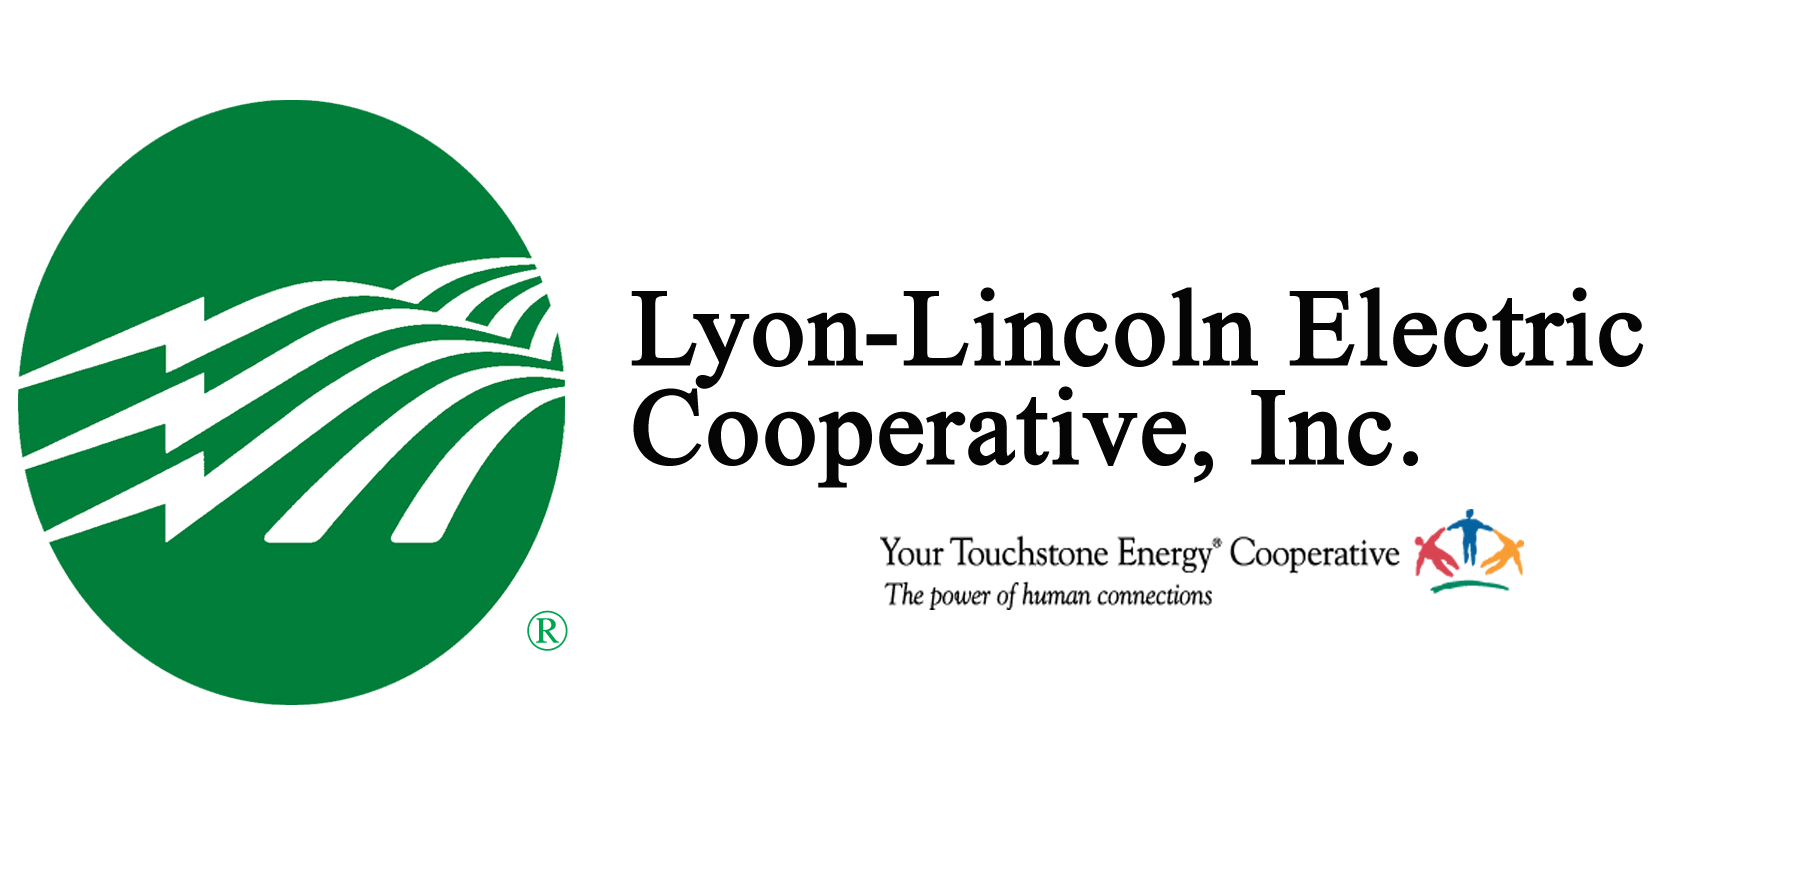 lyon-lincoln-electric-cooperative-celebrates-75-years